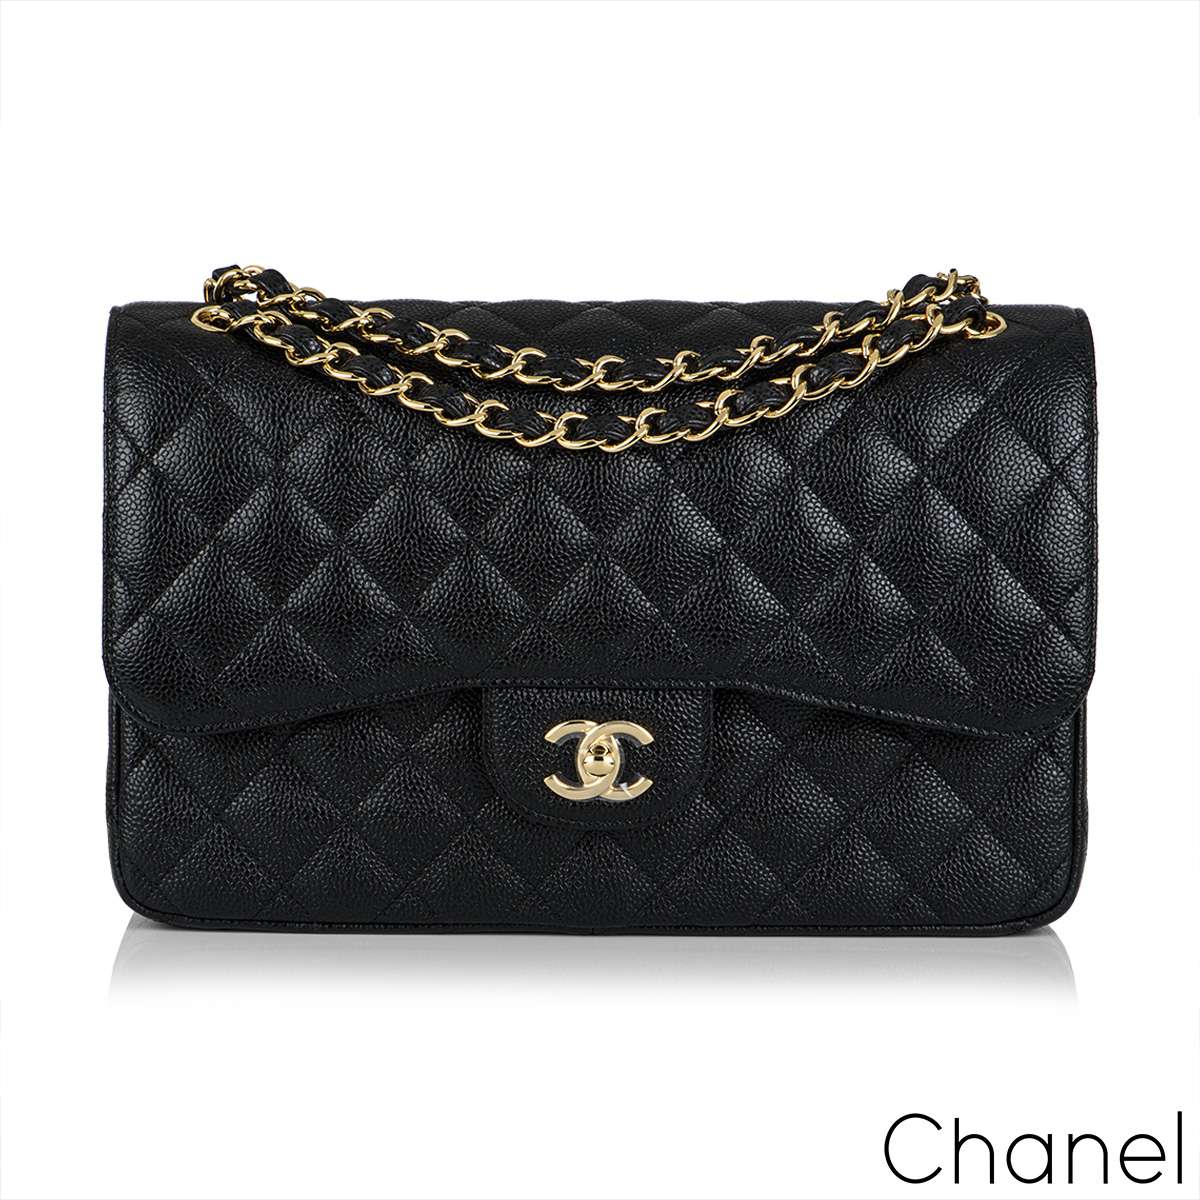 Chanel Classic Jumbo Double Flap in Black Caviar with Shiny Silver Hardware   As New  SOLD  Chanel classic jumbo Chanel classic Chanel